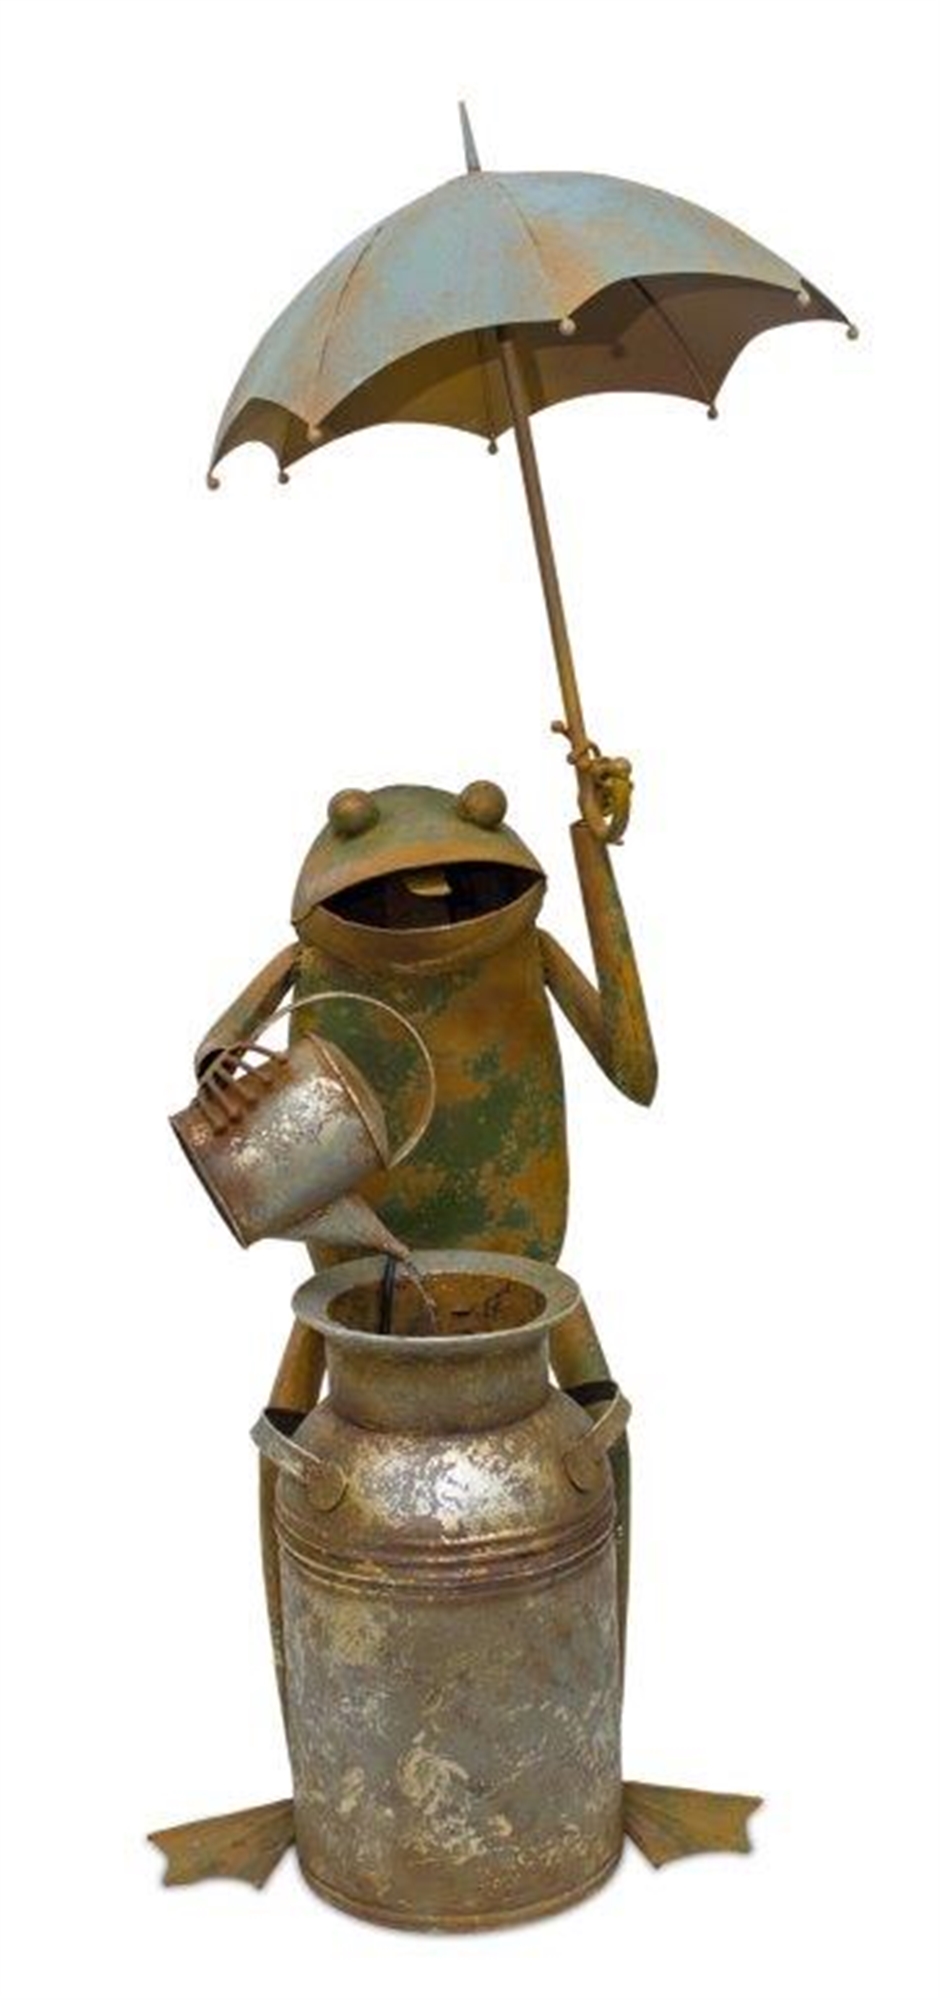 Frog with Umbrella Fountain 22"L x 53.75"H Iron